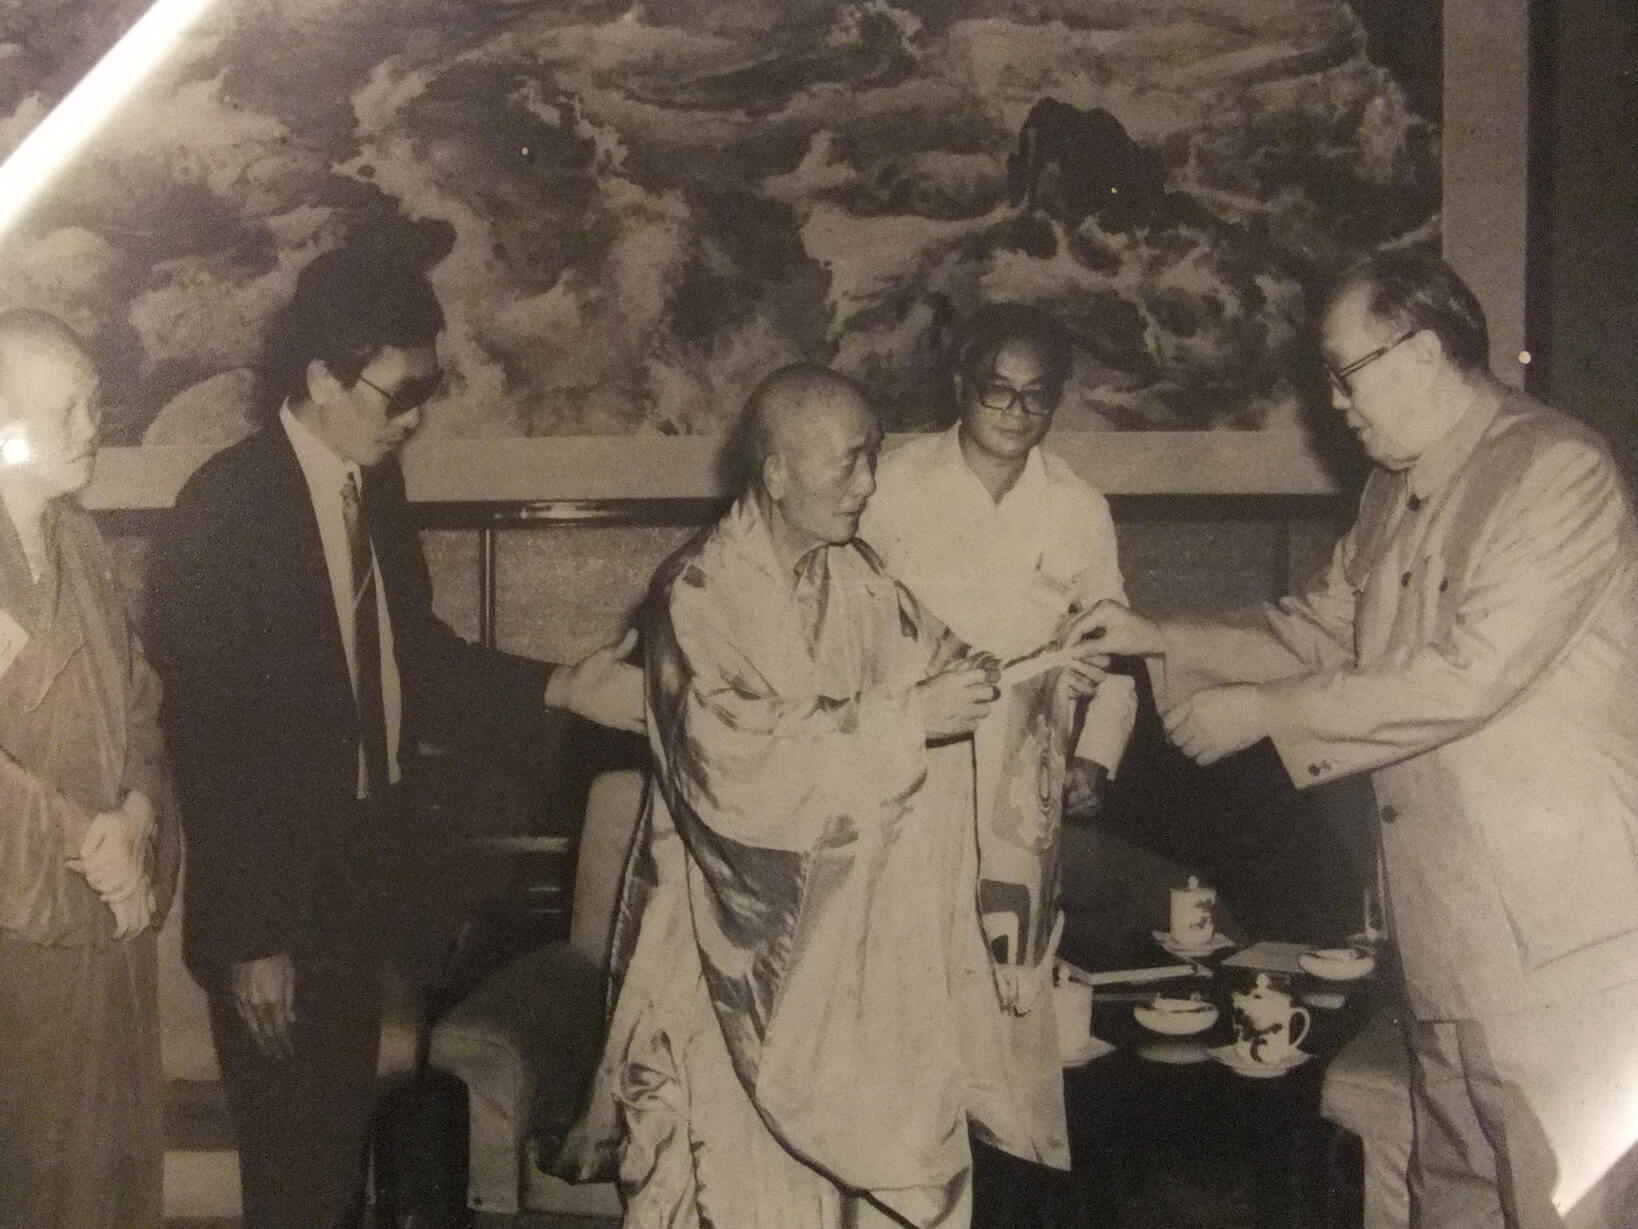 Mr Ang Yew Seng was a devout Buddhist and worked closely with renowned abbots